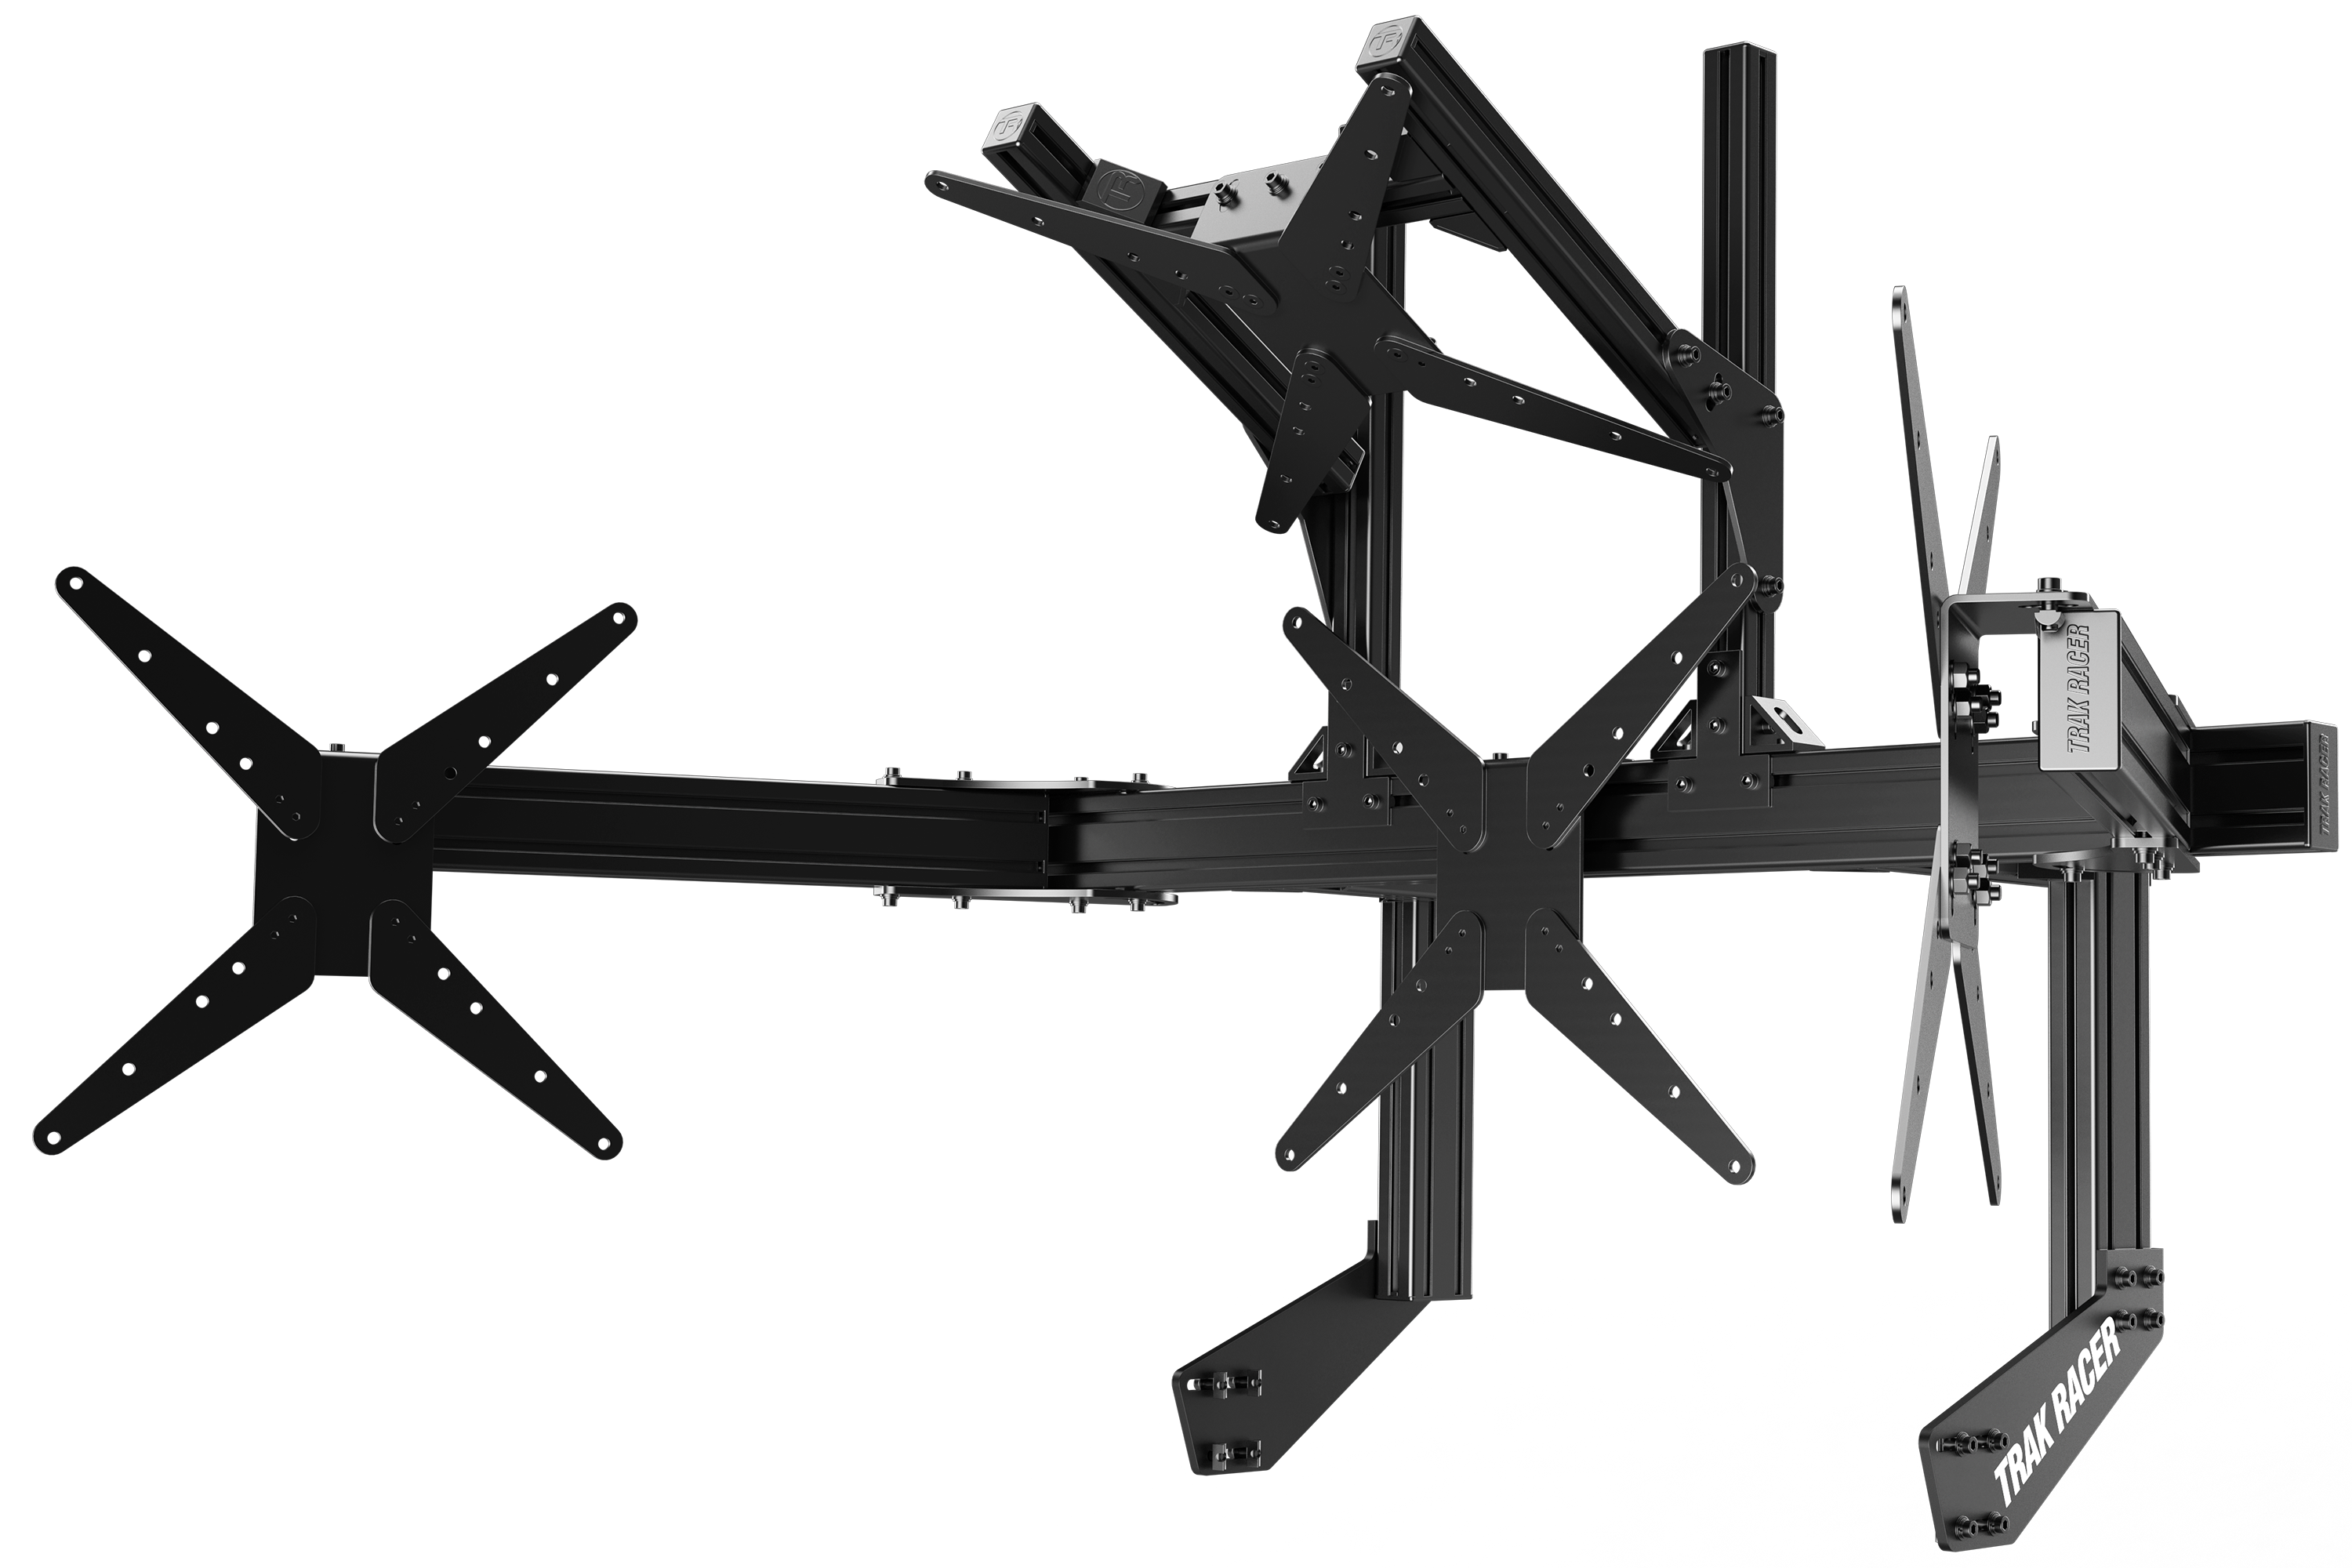 Large Cockpit-Mounted Quad Monitor Stand - 1200mm / 47.25" Wide